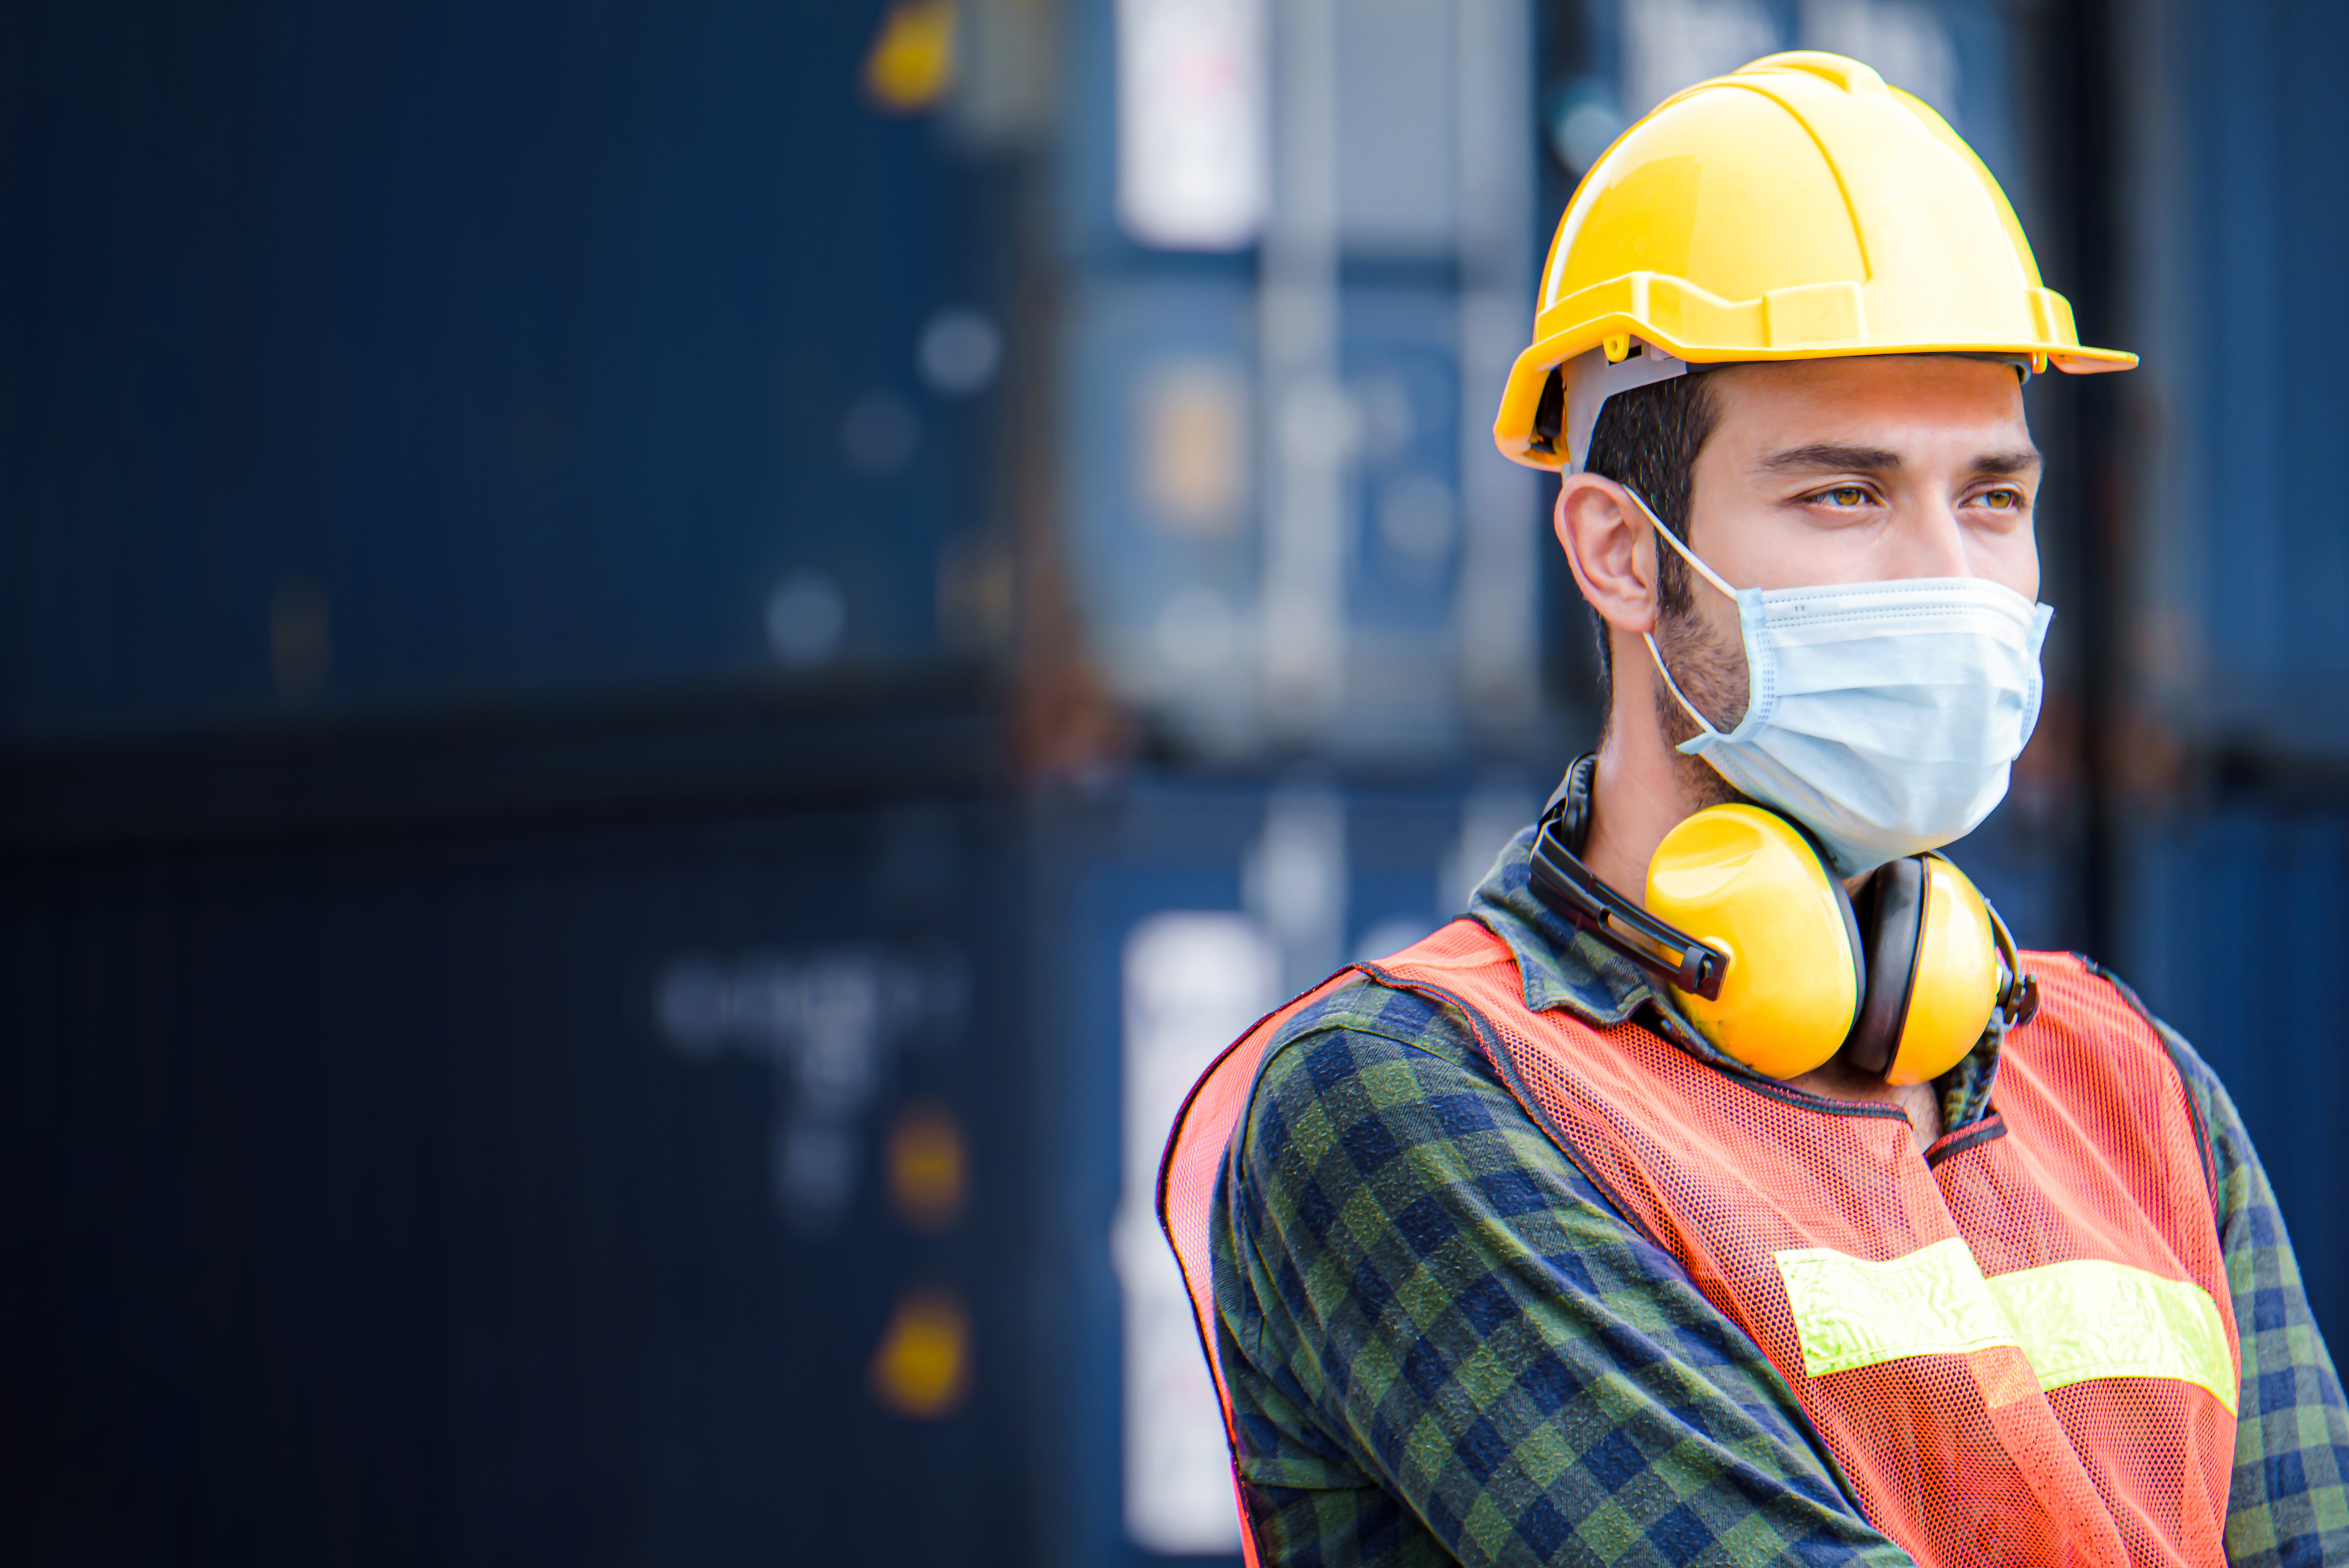 A worker wearing appropriate personal protective equipment